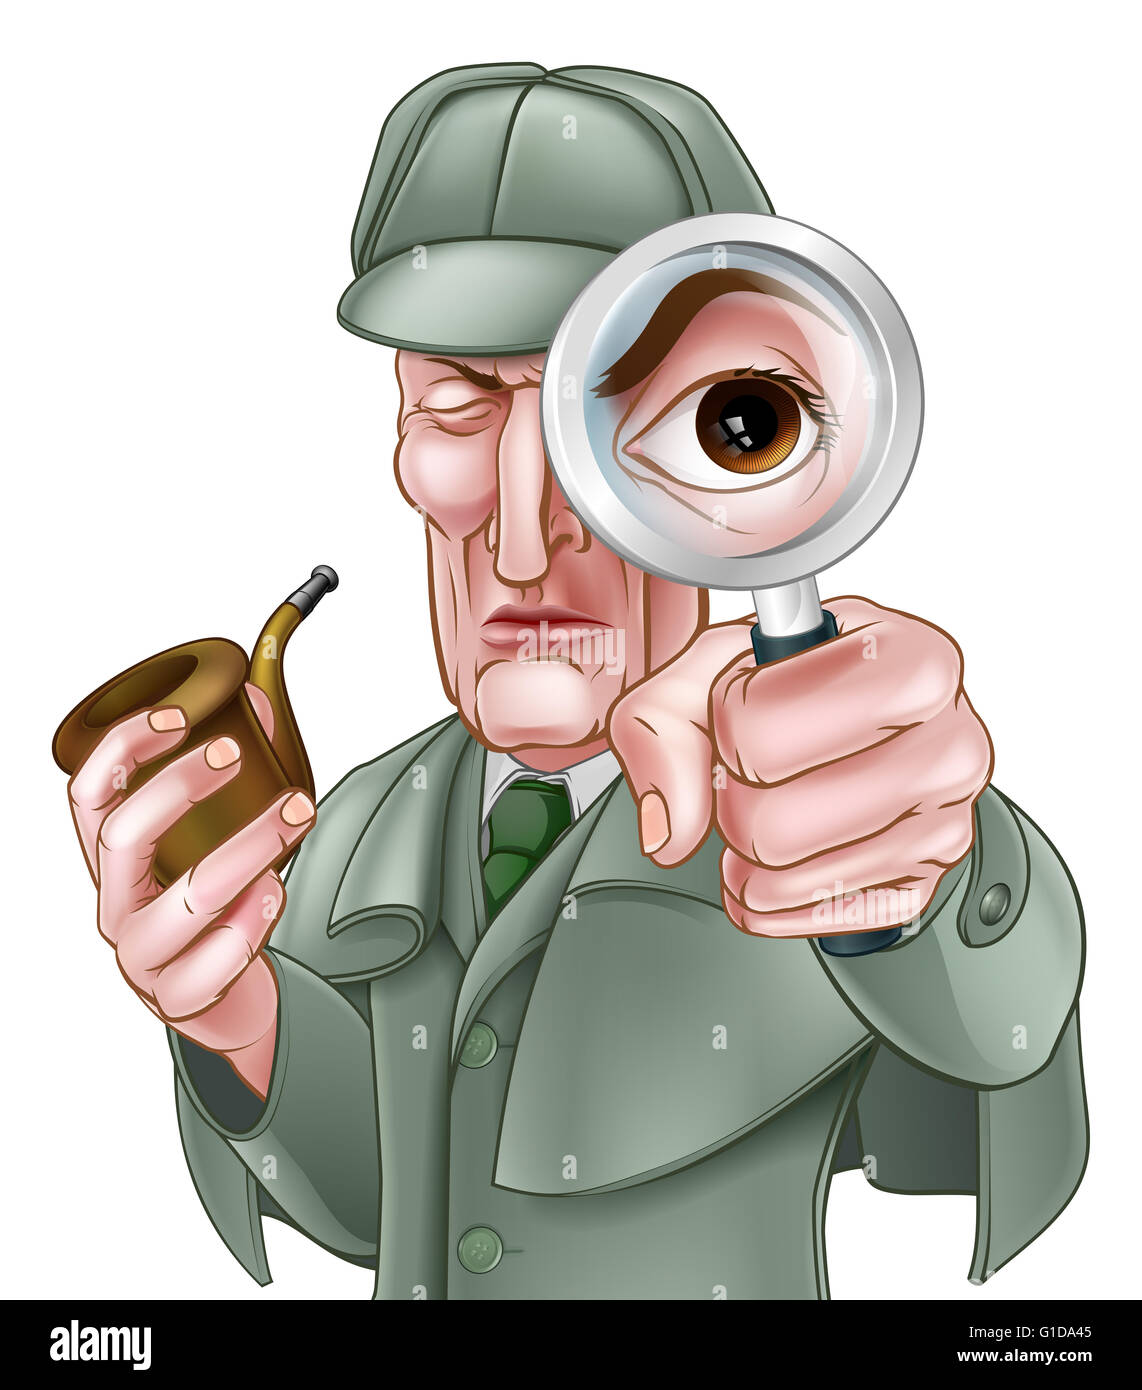 A Sherlock Holmes style Victorian detective cartoon character looking  through a magnifying glass Stock Photo - Alamy